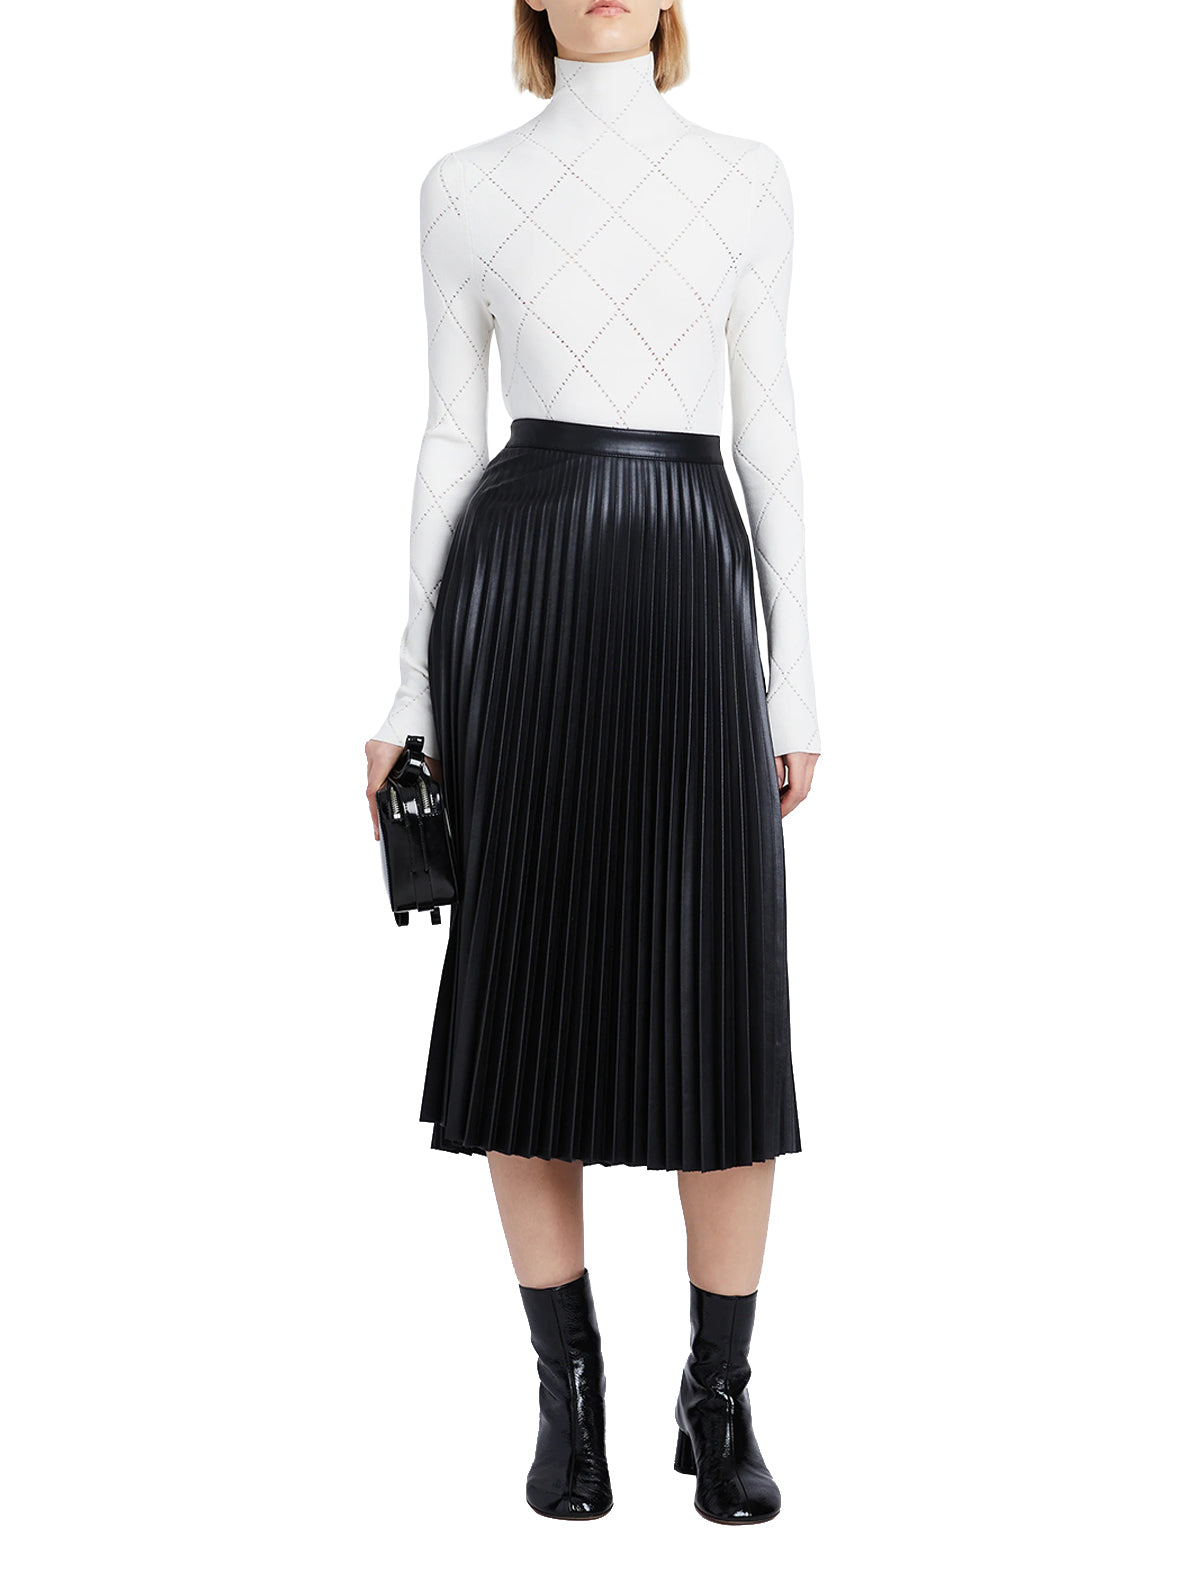 PROENZA SCHOULER WHITE LABEL Faux Leather Pleated Skirt in Black